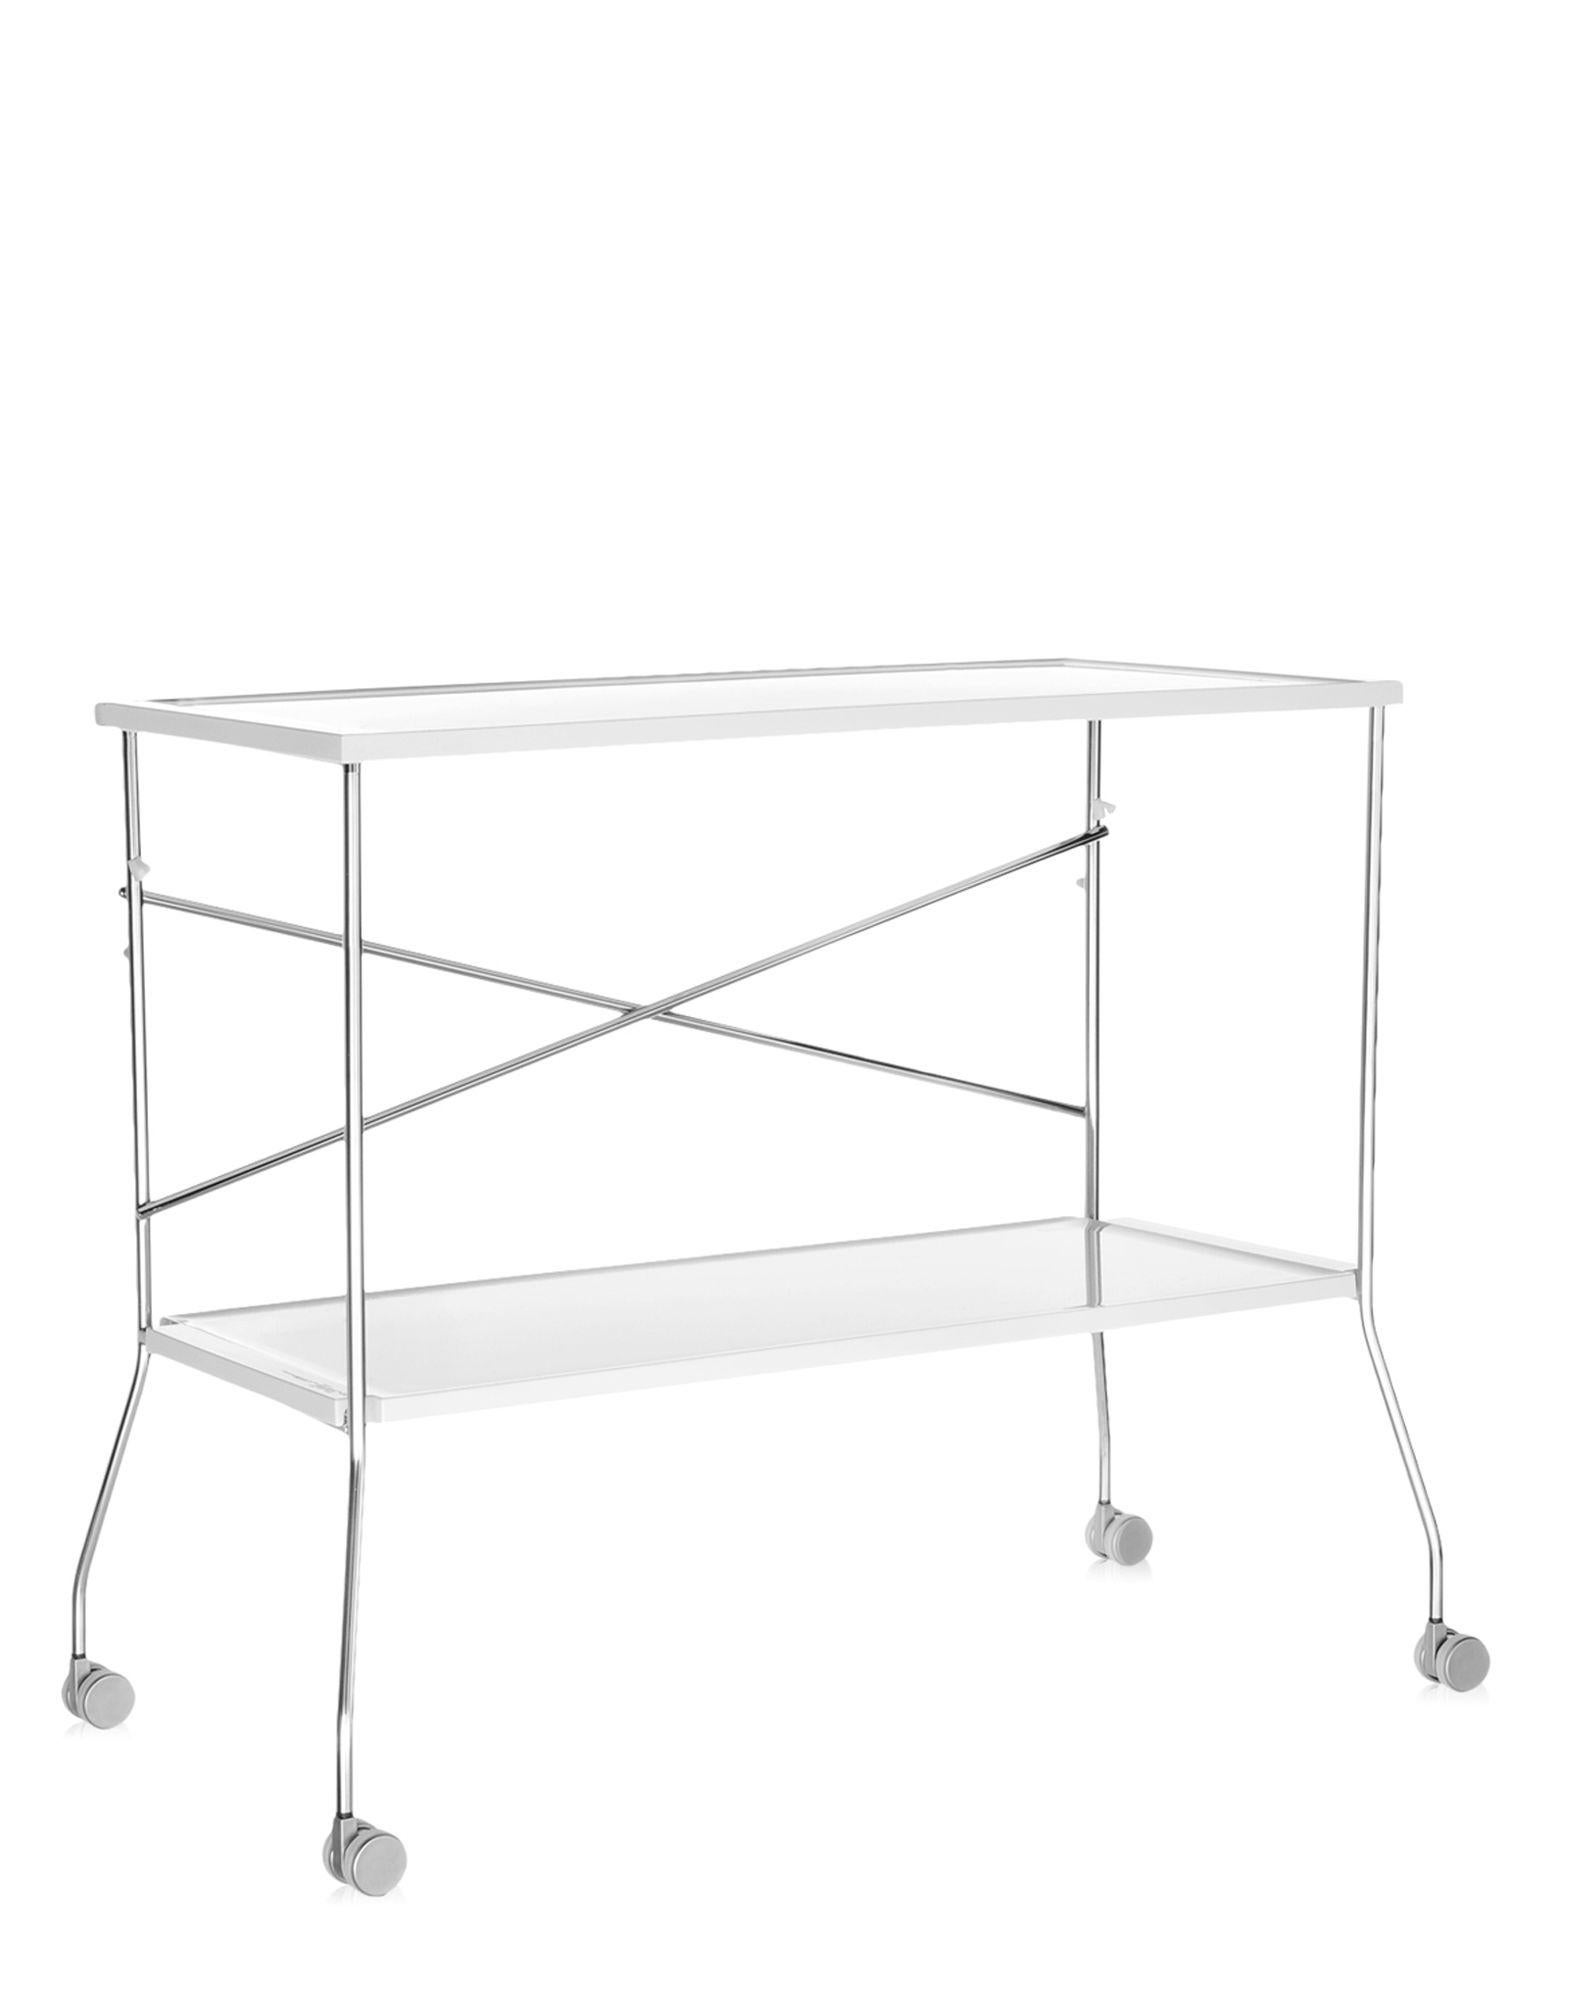 Kartell brings transparency to the world of trolleys too and thus we have flip, the folding trolley which combines the transparent plastic surfaces of the trays with a metal frame. The trays made of polymethylmethacrylate and can be used separately.